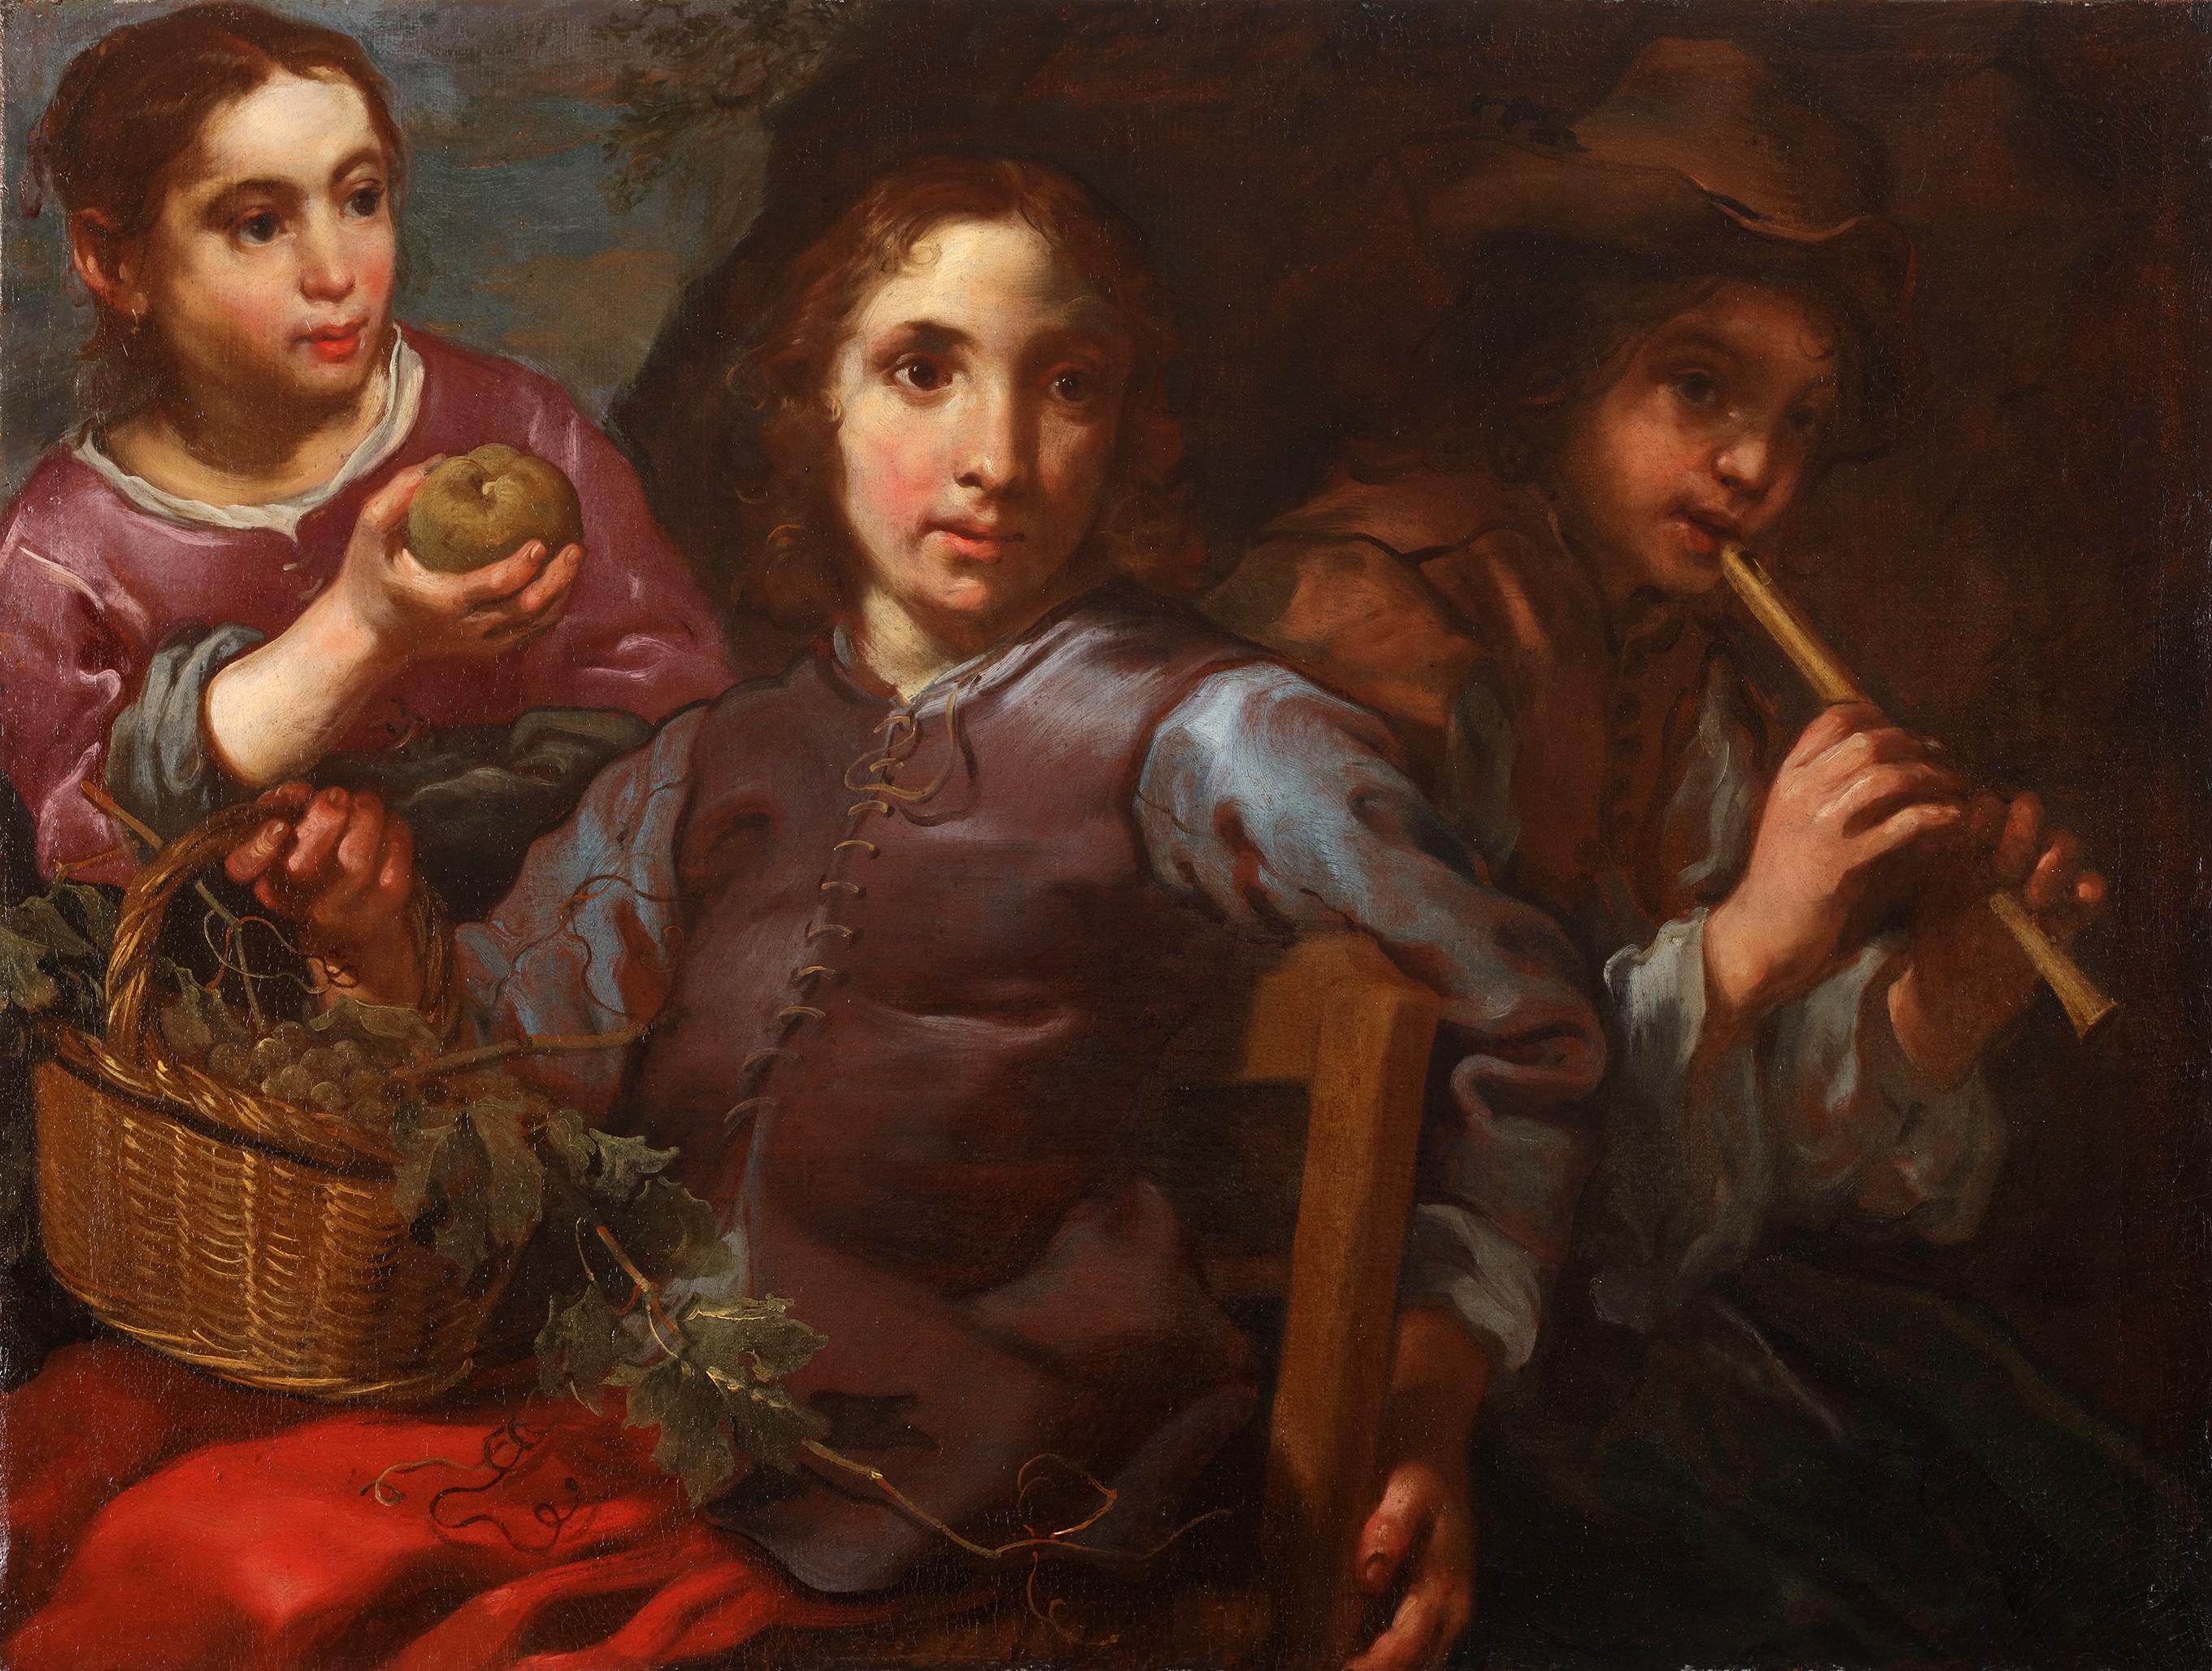 “A portrait of three children, one of them holding a basket of grapes, while another plays the flute”

Oil on canvas

Housed in a blackened 17th-century frame.

We'd like to thank dr. Fred Meijer and dr. Guido Jansen for their advice.

Dimensions: